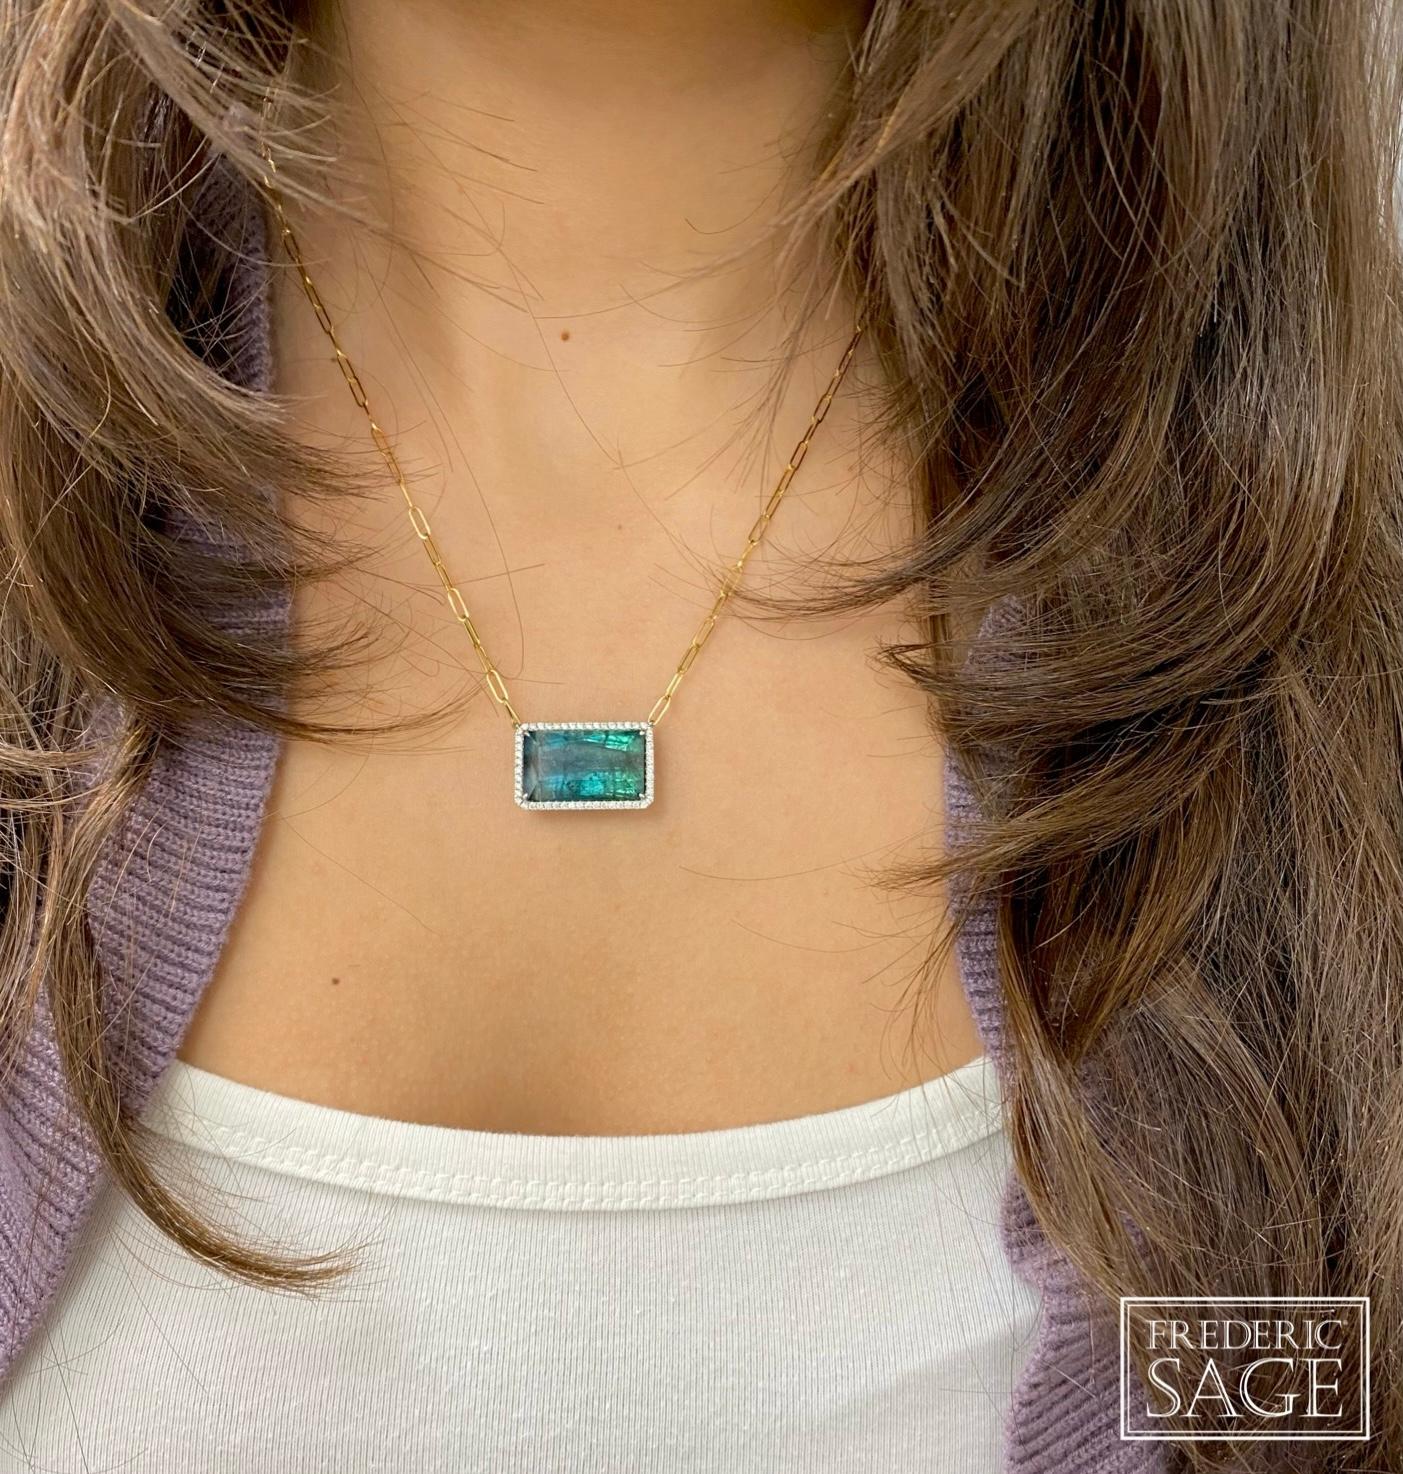 18K Yellow & White Gold Bi-color Blue Green Tourmaline Set Horizontally In a White Gold Diamond Mounting With Attatched Yellow Gold Paperclip Chain, TOUR 15.04 CT. 52 DIA 0.37 CT, approx 22.5 mm x 25 mm

Available in other metal/ gemstone options: